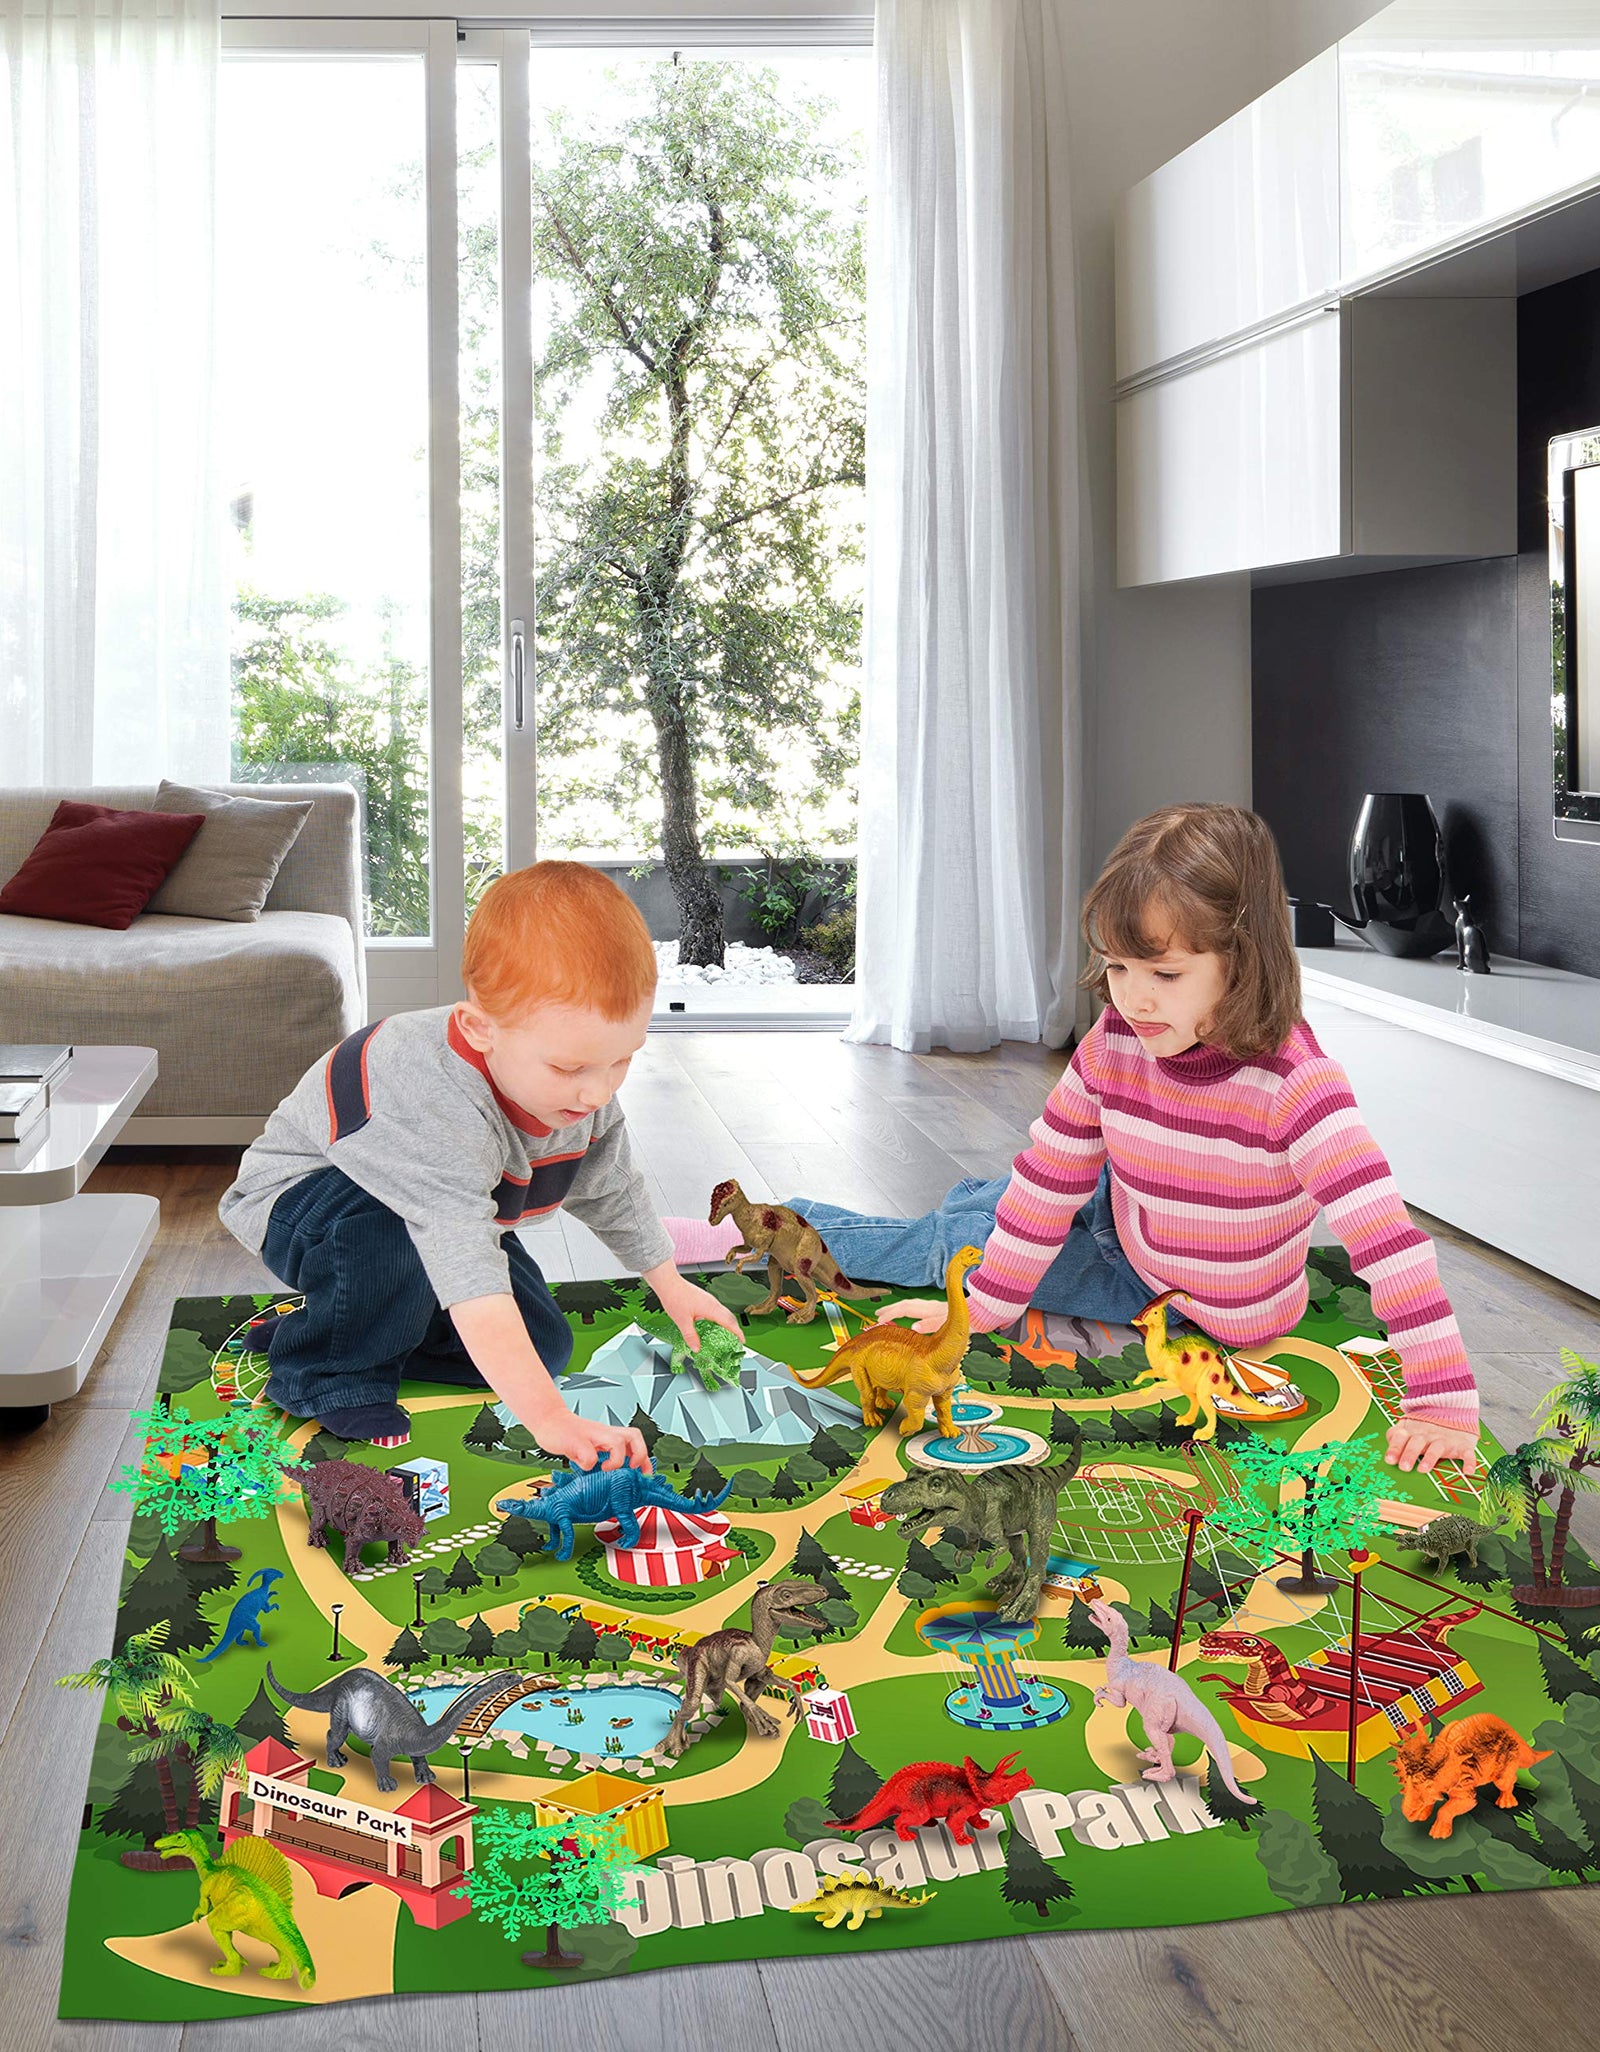 Dinosaur Toys Playset with Activity Play Mat for Kids,Realistic Dinosaur Figures, Trees,Creating a Dino World Including, Birthday Gift for Boys and Girls Ages 3 4 5 6 Years Old